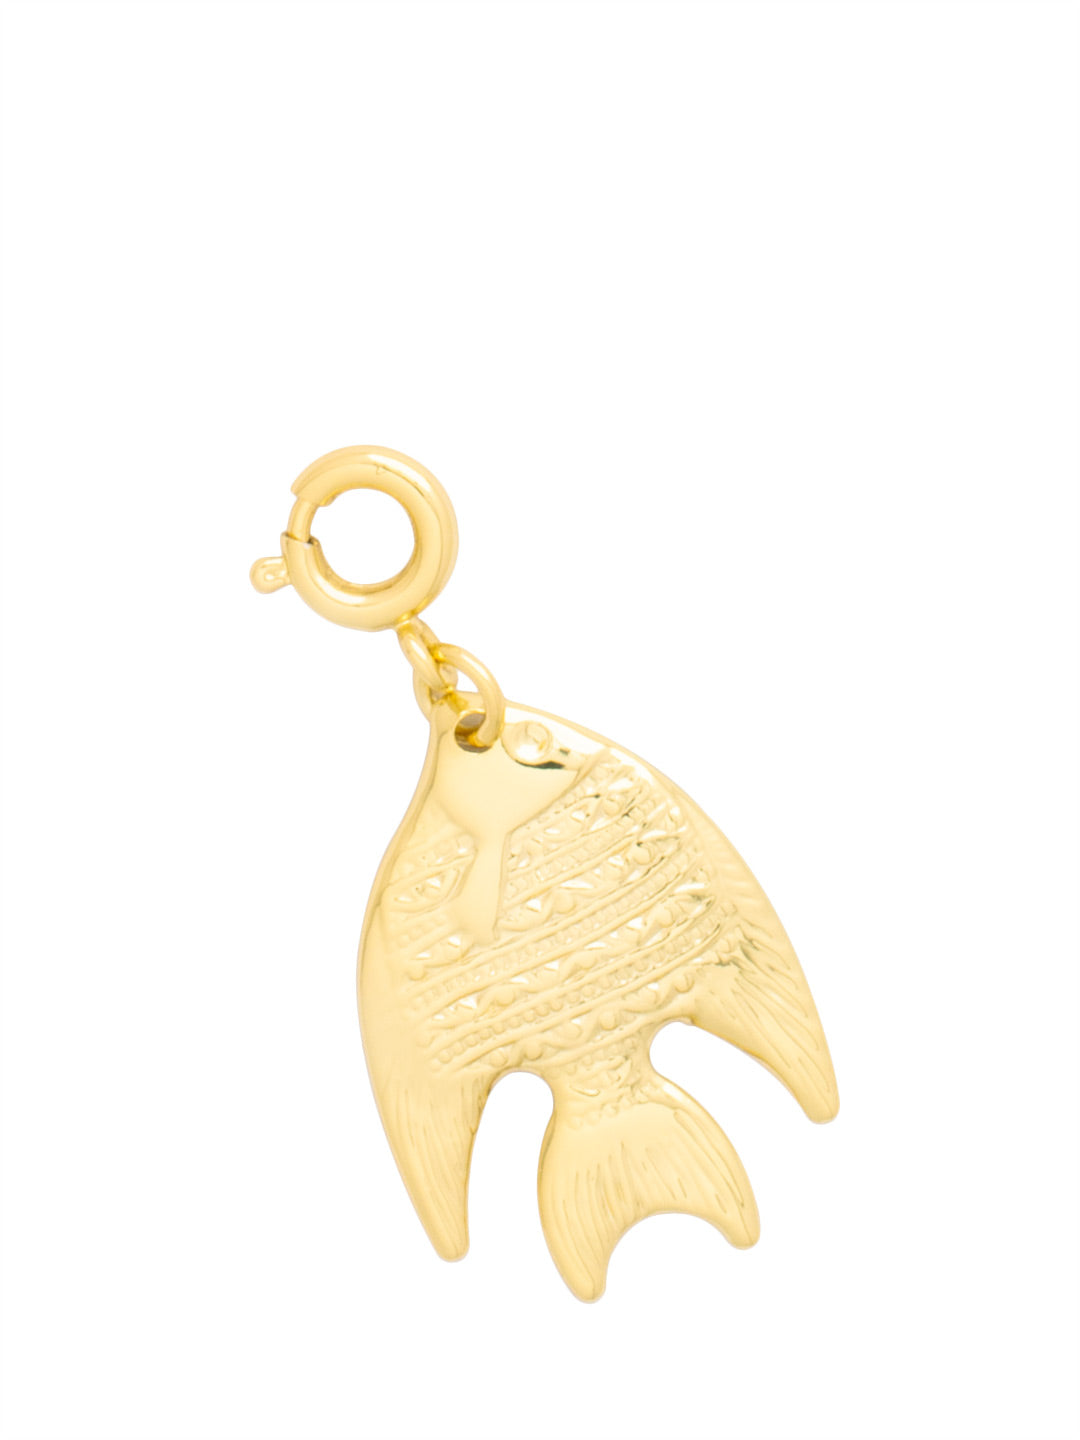 Fish Charm - CFG20BGMTL - <p>Metal fish charm with a spring ring clasp. From Sorrelli's Bare Metallic collection in our Bright Gold-tone finish.</p>